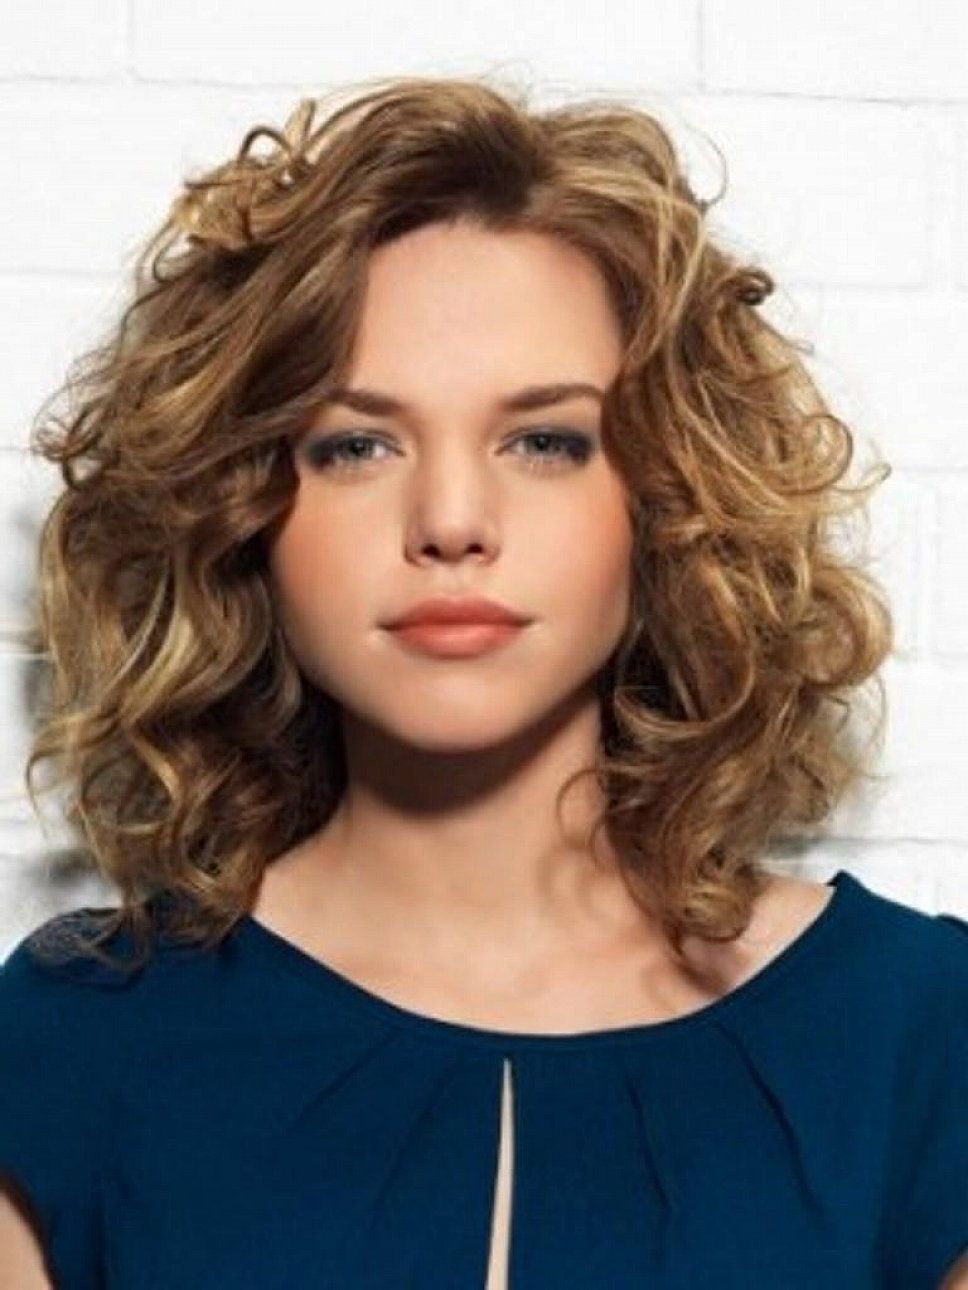 Medium Wavy Hairstyle With Swept Bangs For Women With Thick Hair And With Regard To Fashionable Medium Haircuts For Round Faces With Curly Hair (View 3 of 20)